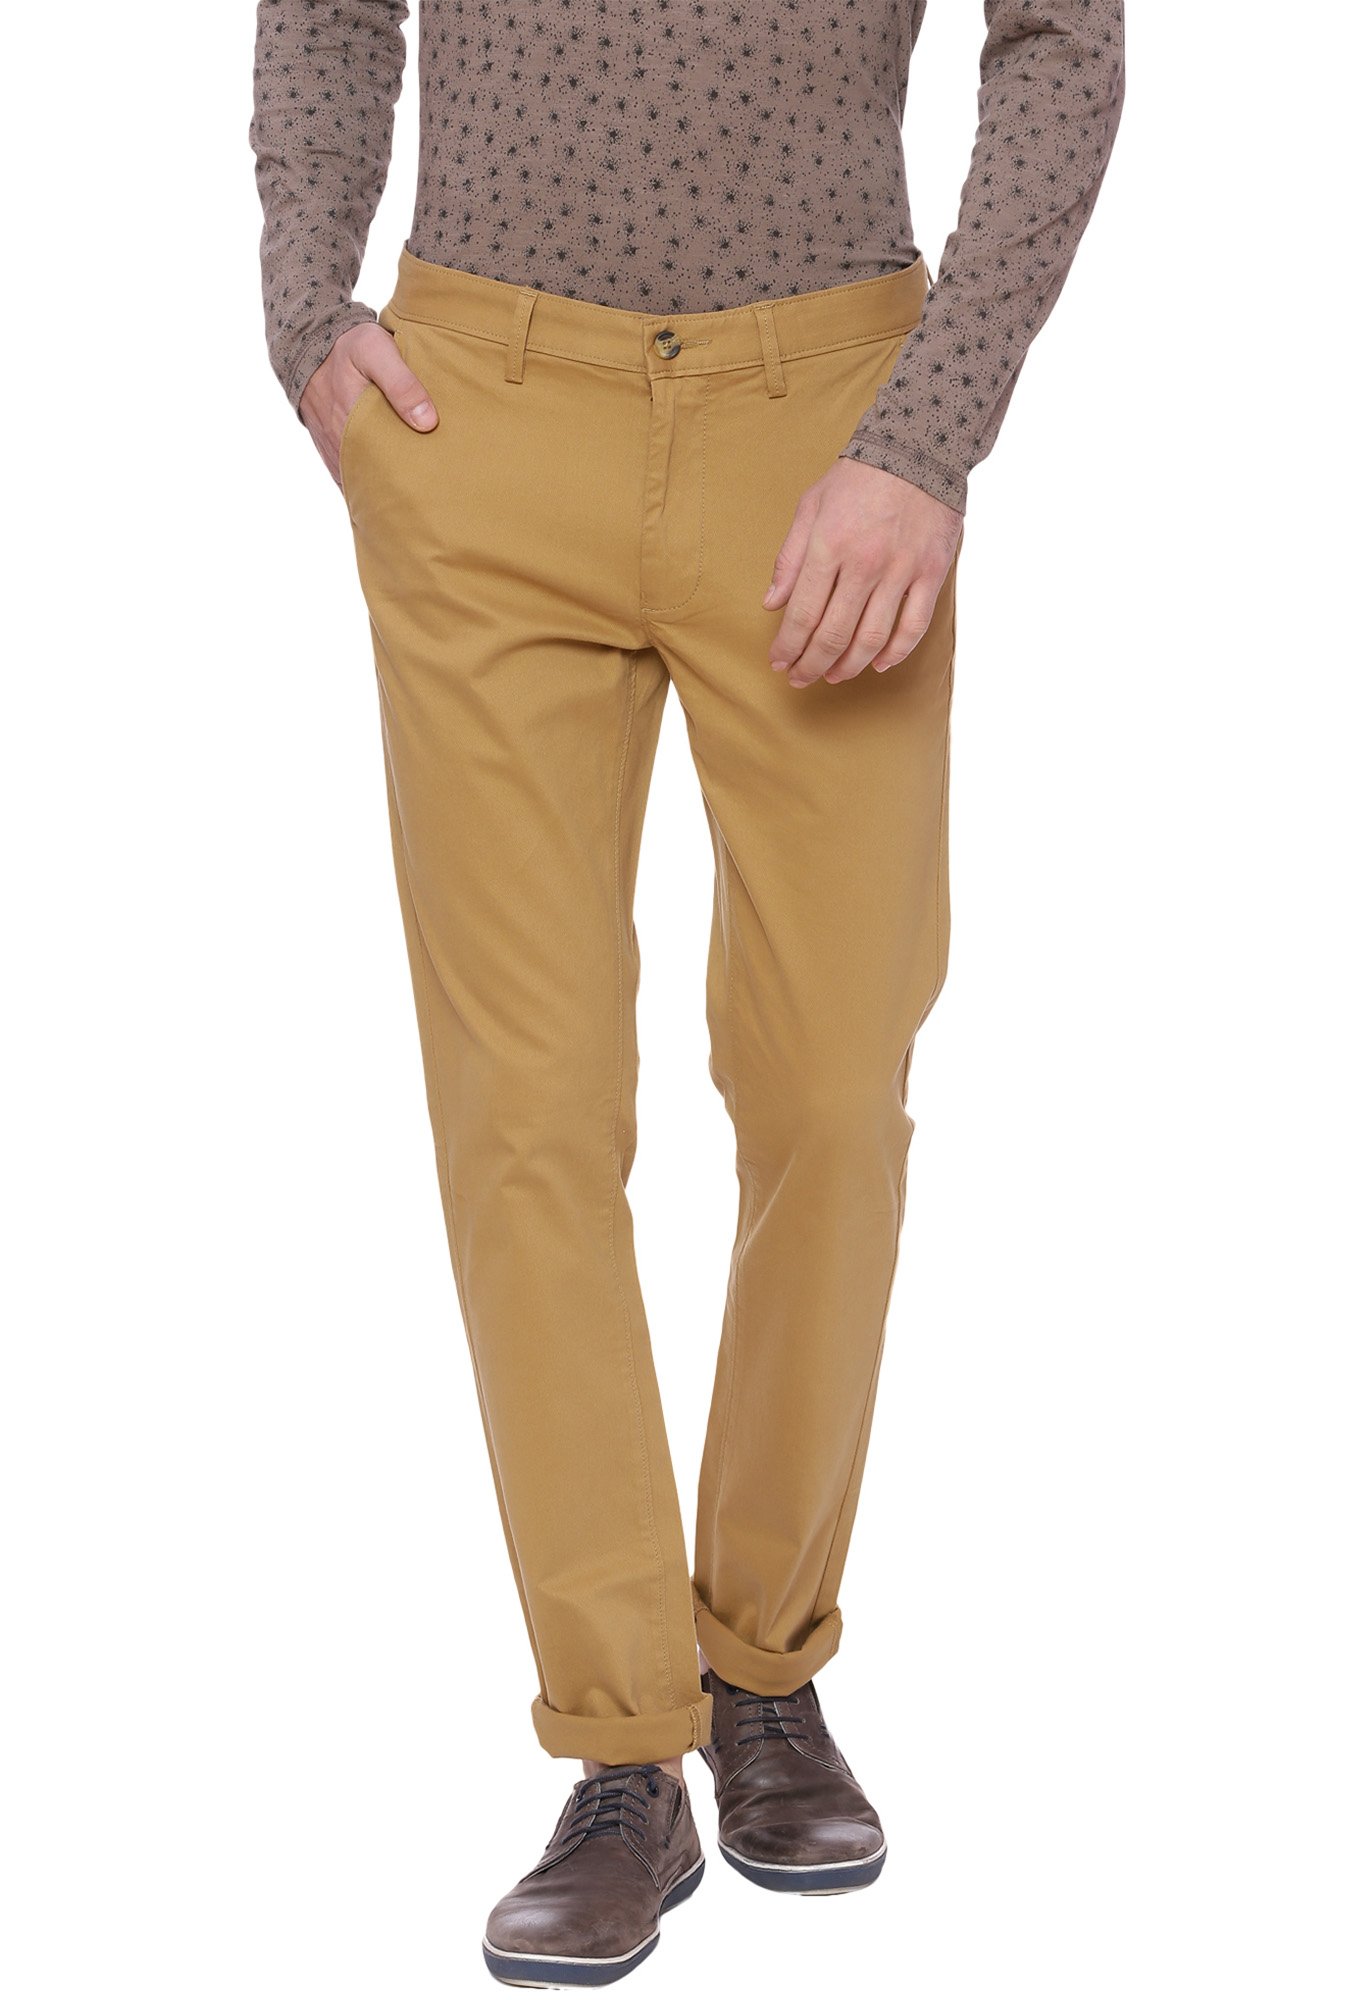 Buy Basics Green Tapered Fit Trousers for Mens Online  Tata CLiQ